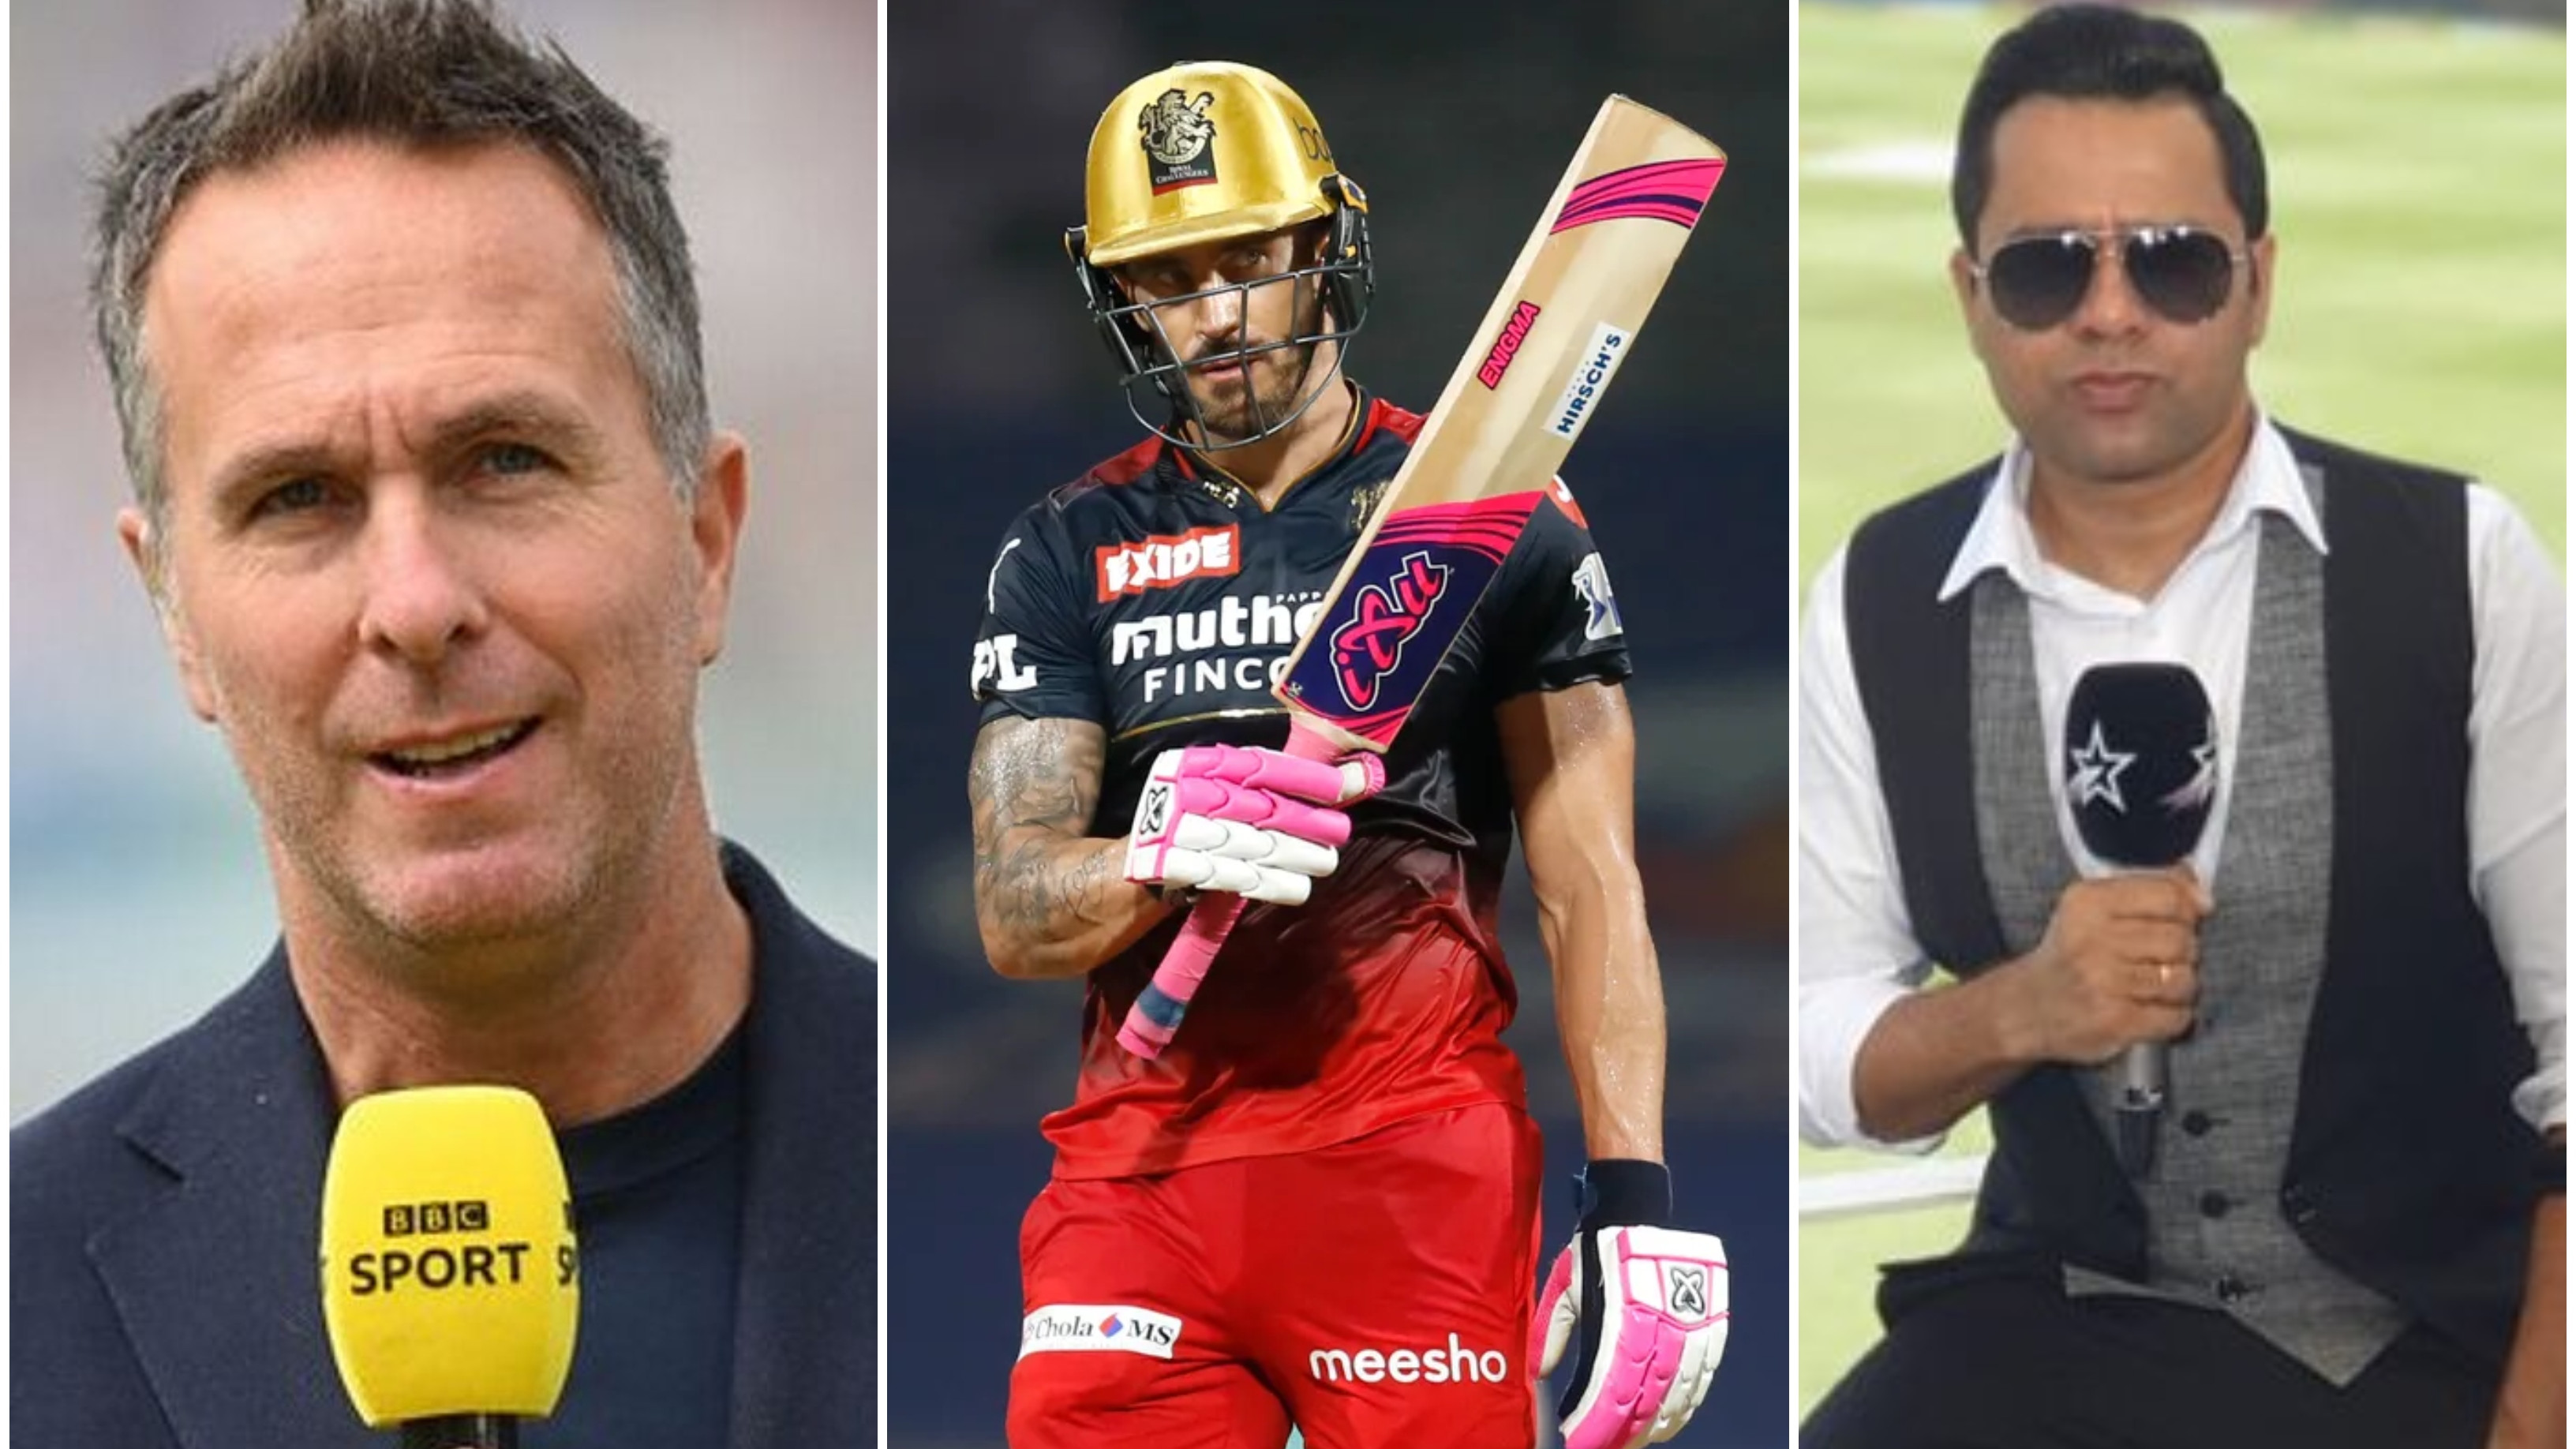 IPL 2022: Cricket fraternity reacts as Faf du Plessis, Josh Hazlewood power RCB to a convincing win over LSG